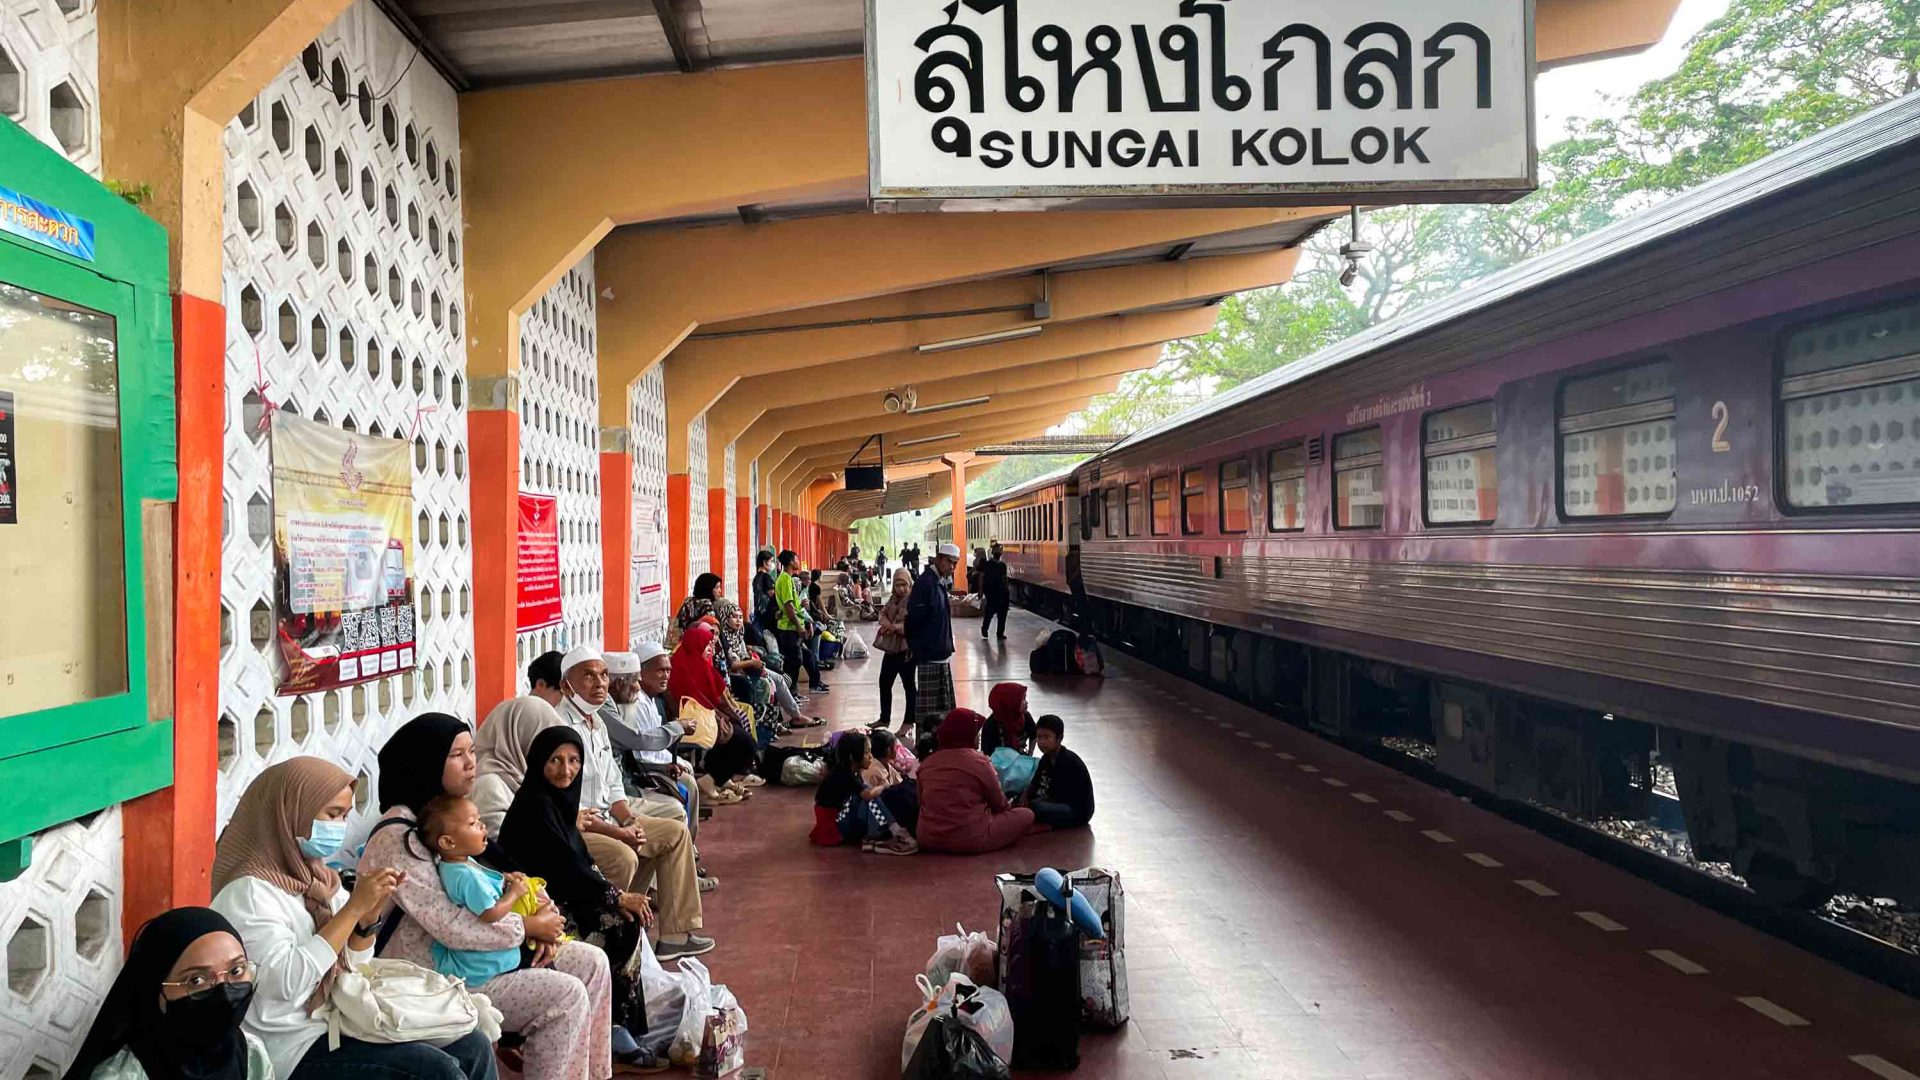 People sit on the platform of a station with a train pulled in.